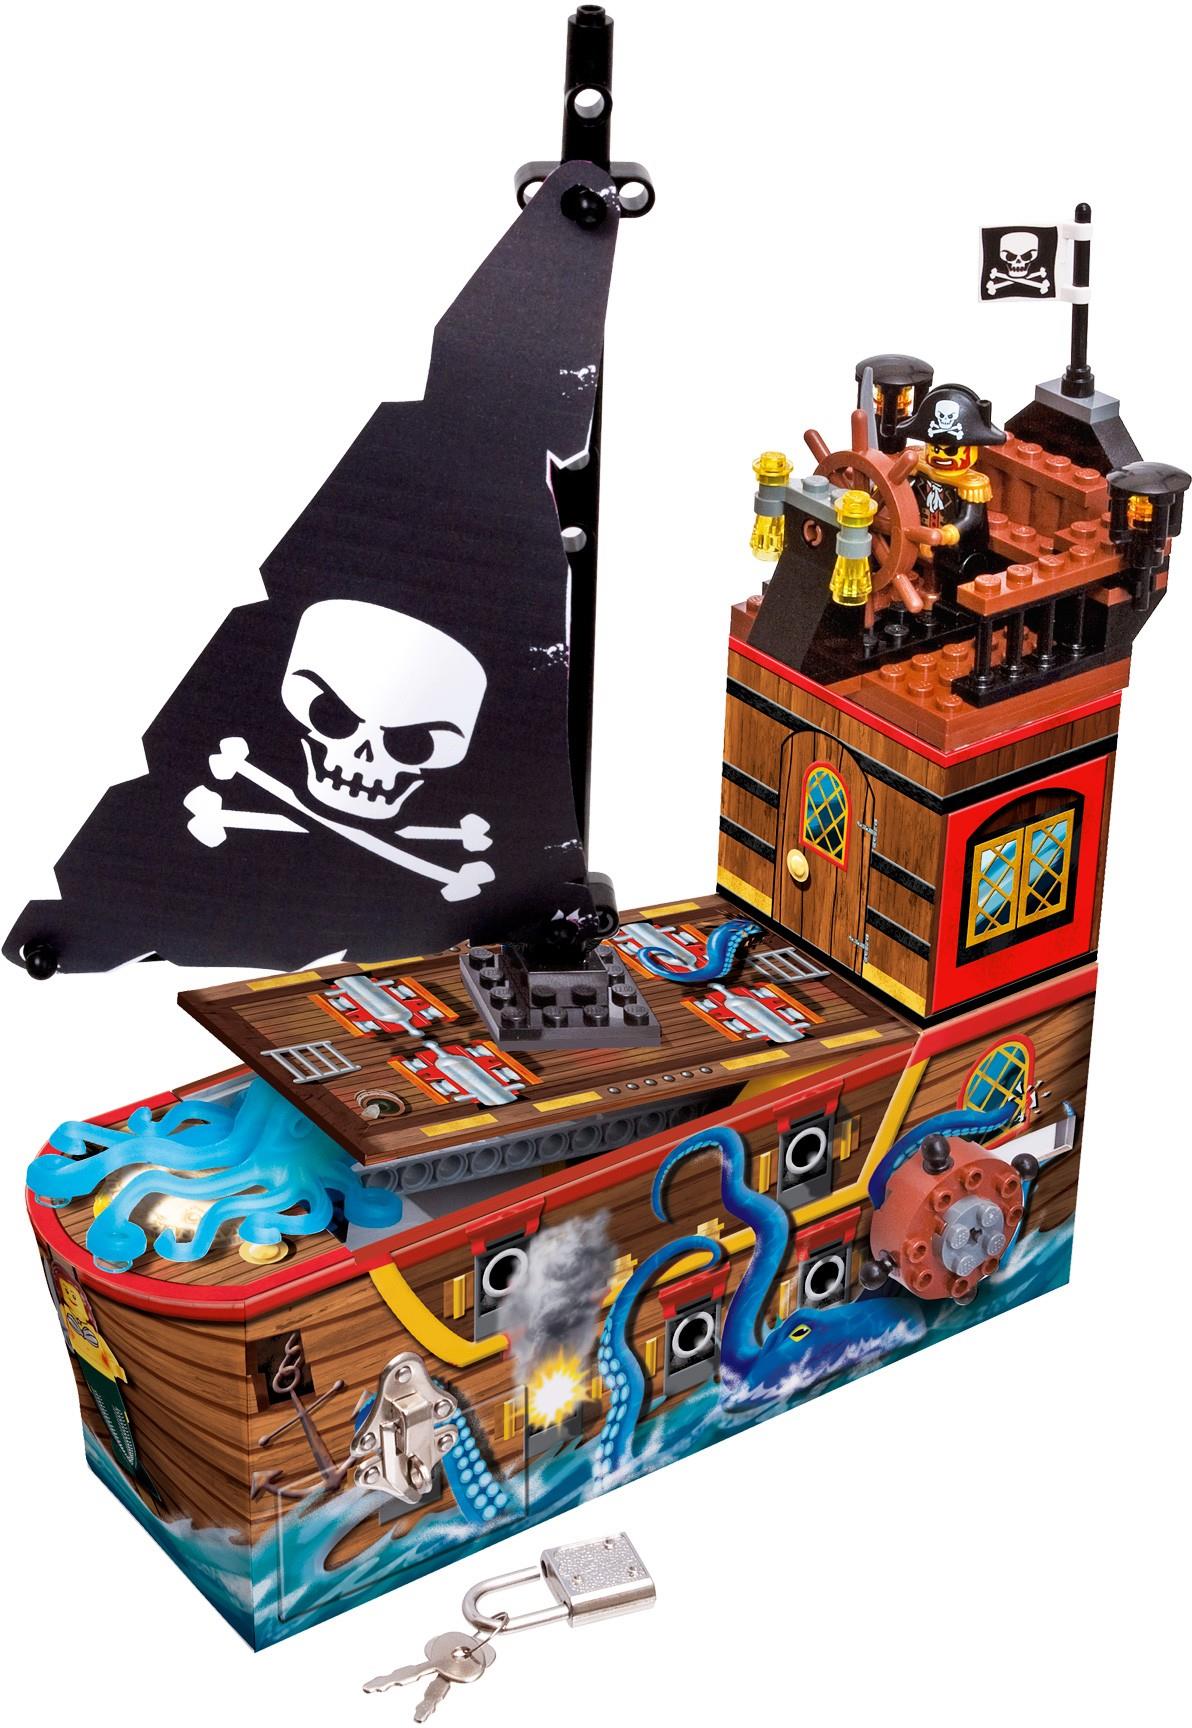 Lego 40529 Lego 40533 VIP Castle and Pirate Coin